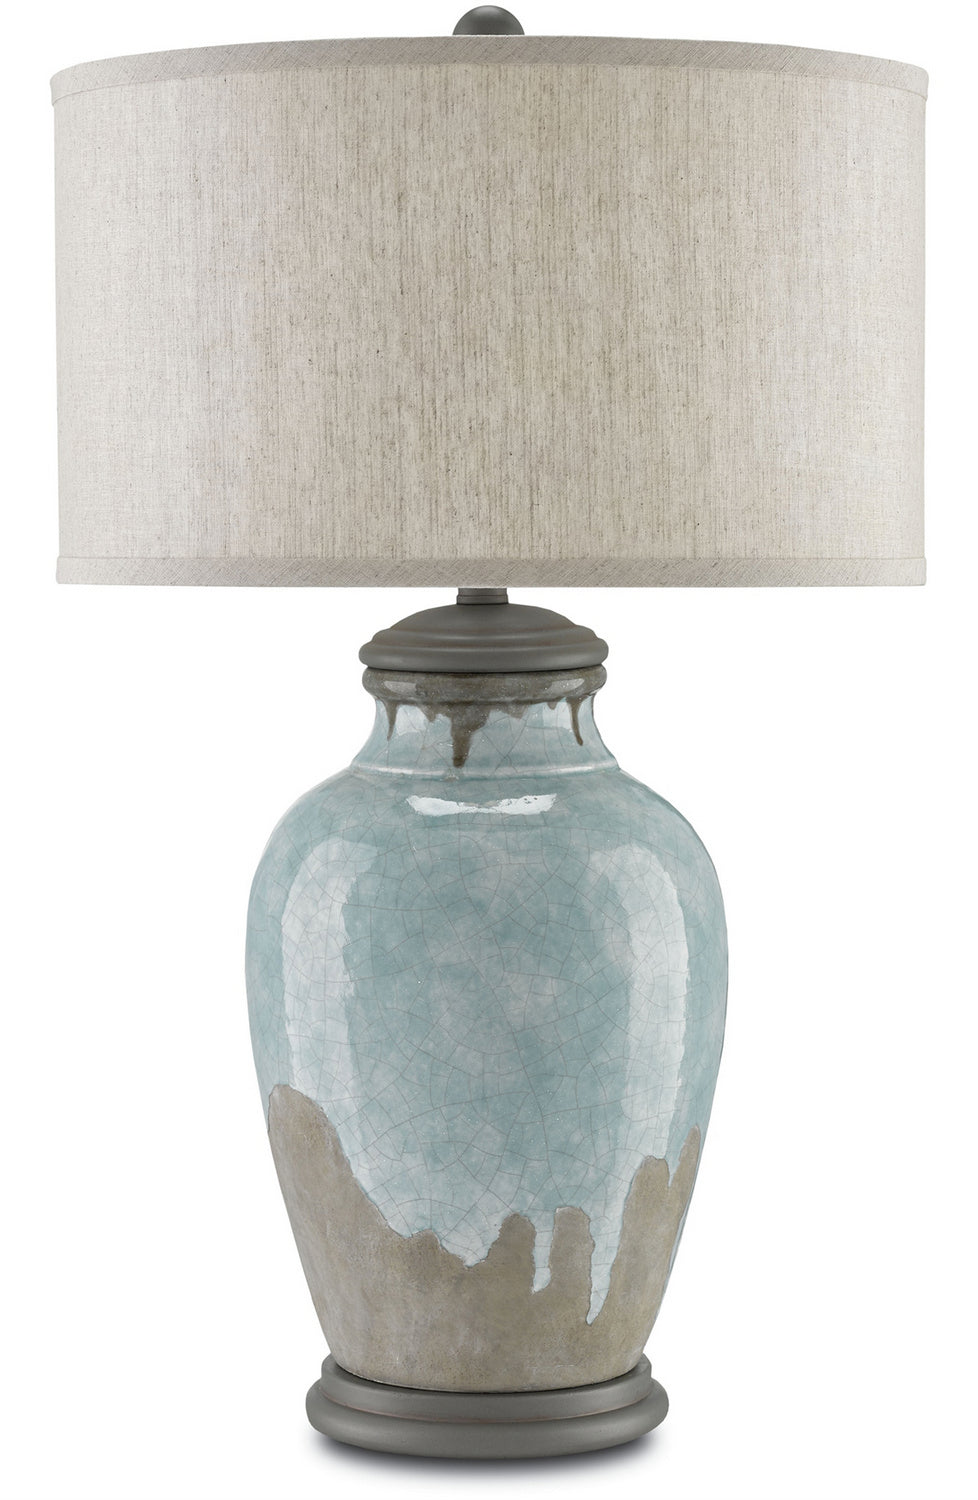 One Light Table Lamp from the Chatswood collection in Blue-Green/Gray/Hiroshi Gray finish